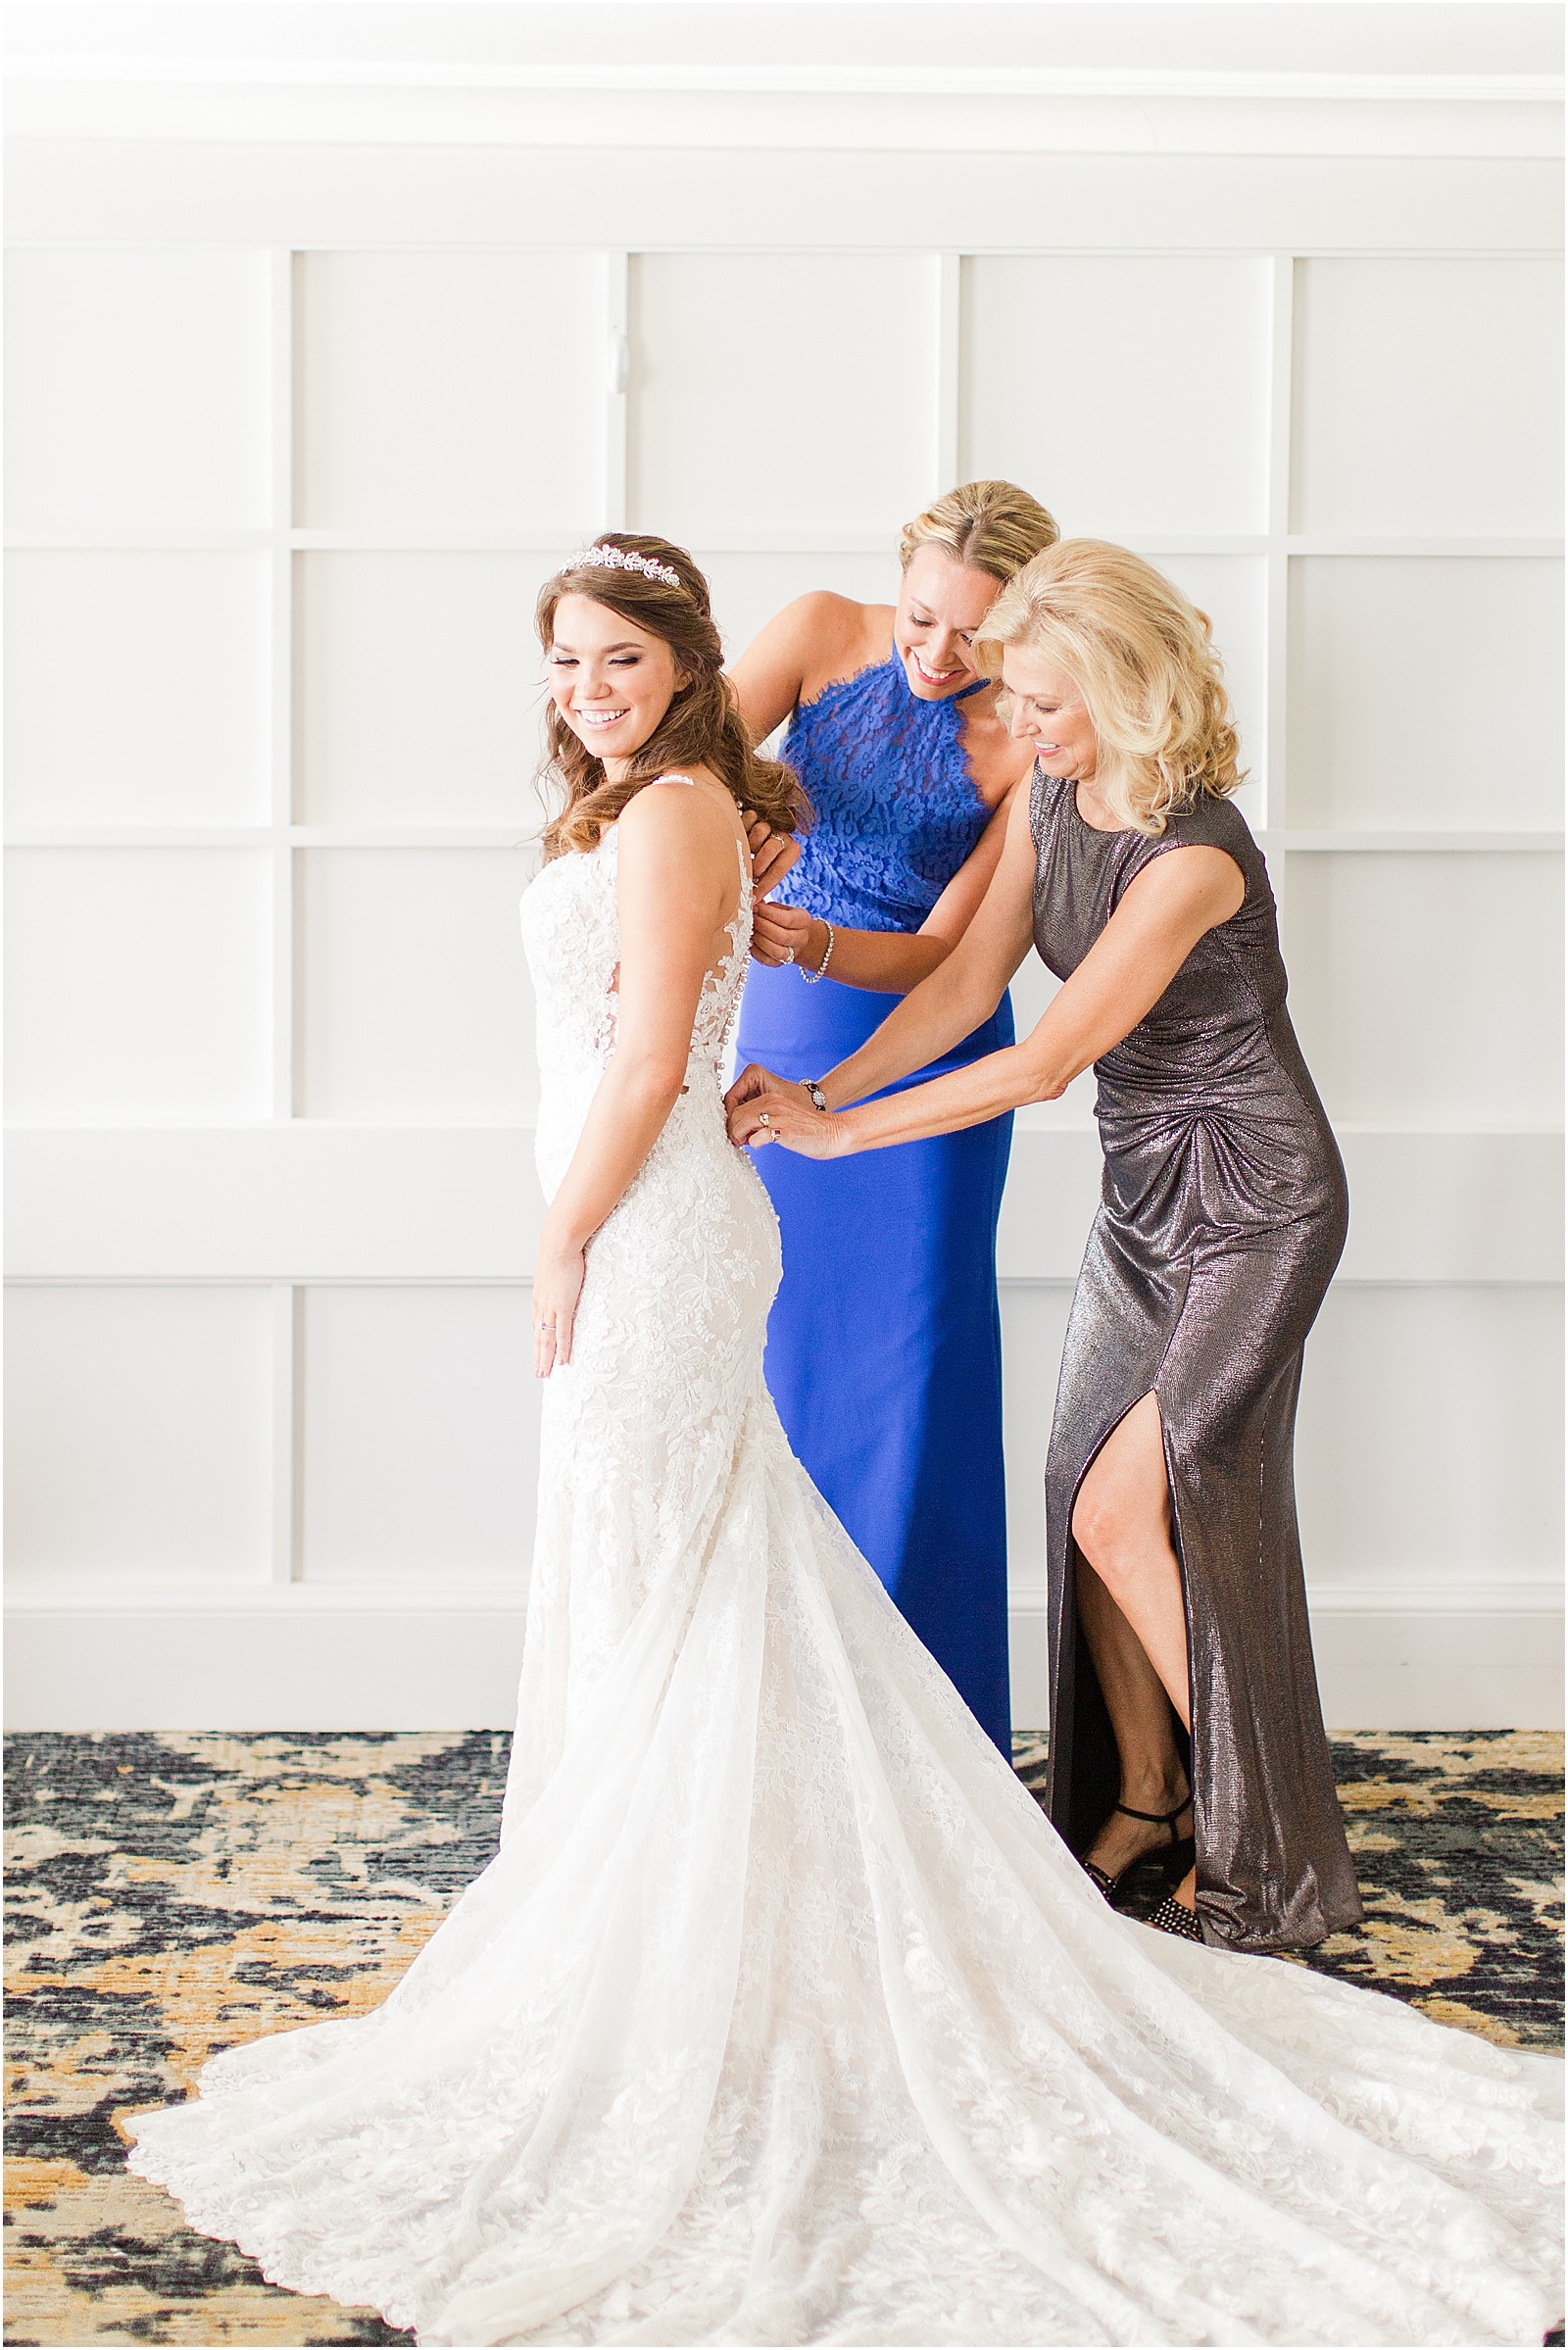 An Evansville County Club Wedding | Abby and Stratton 007.jpg